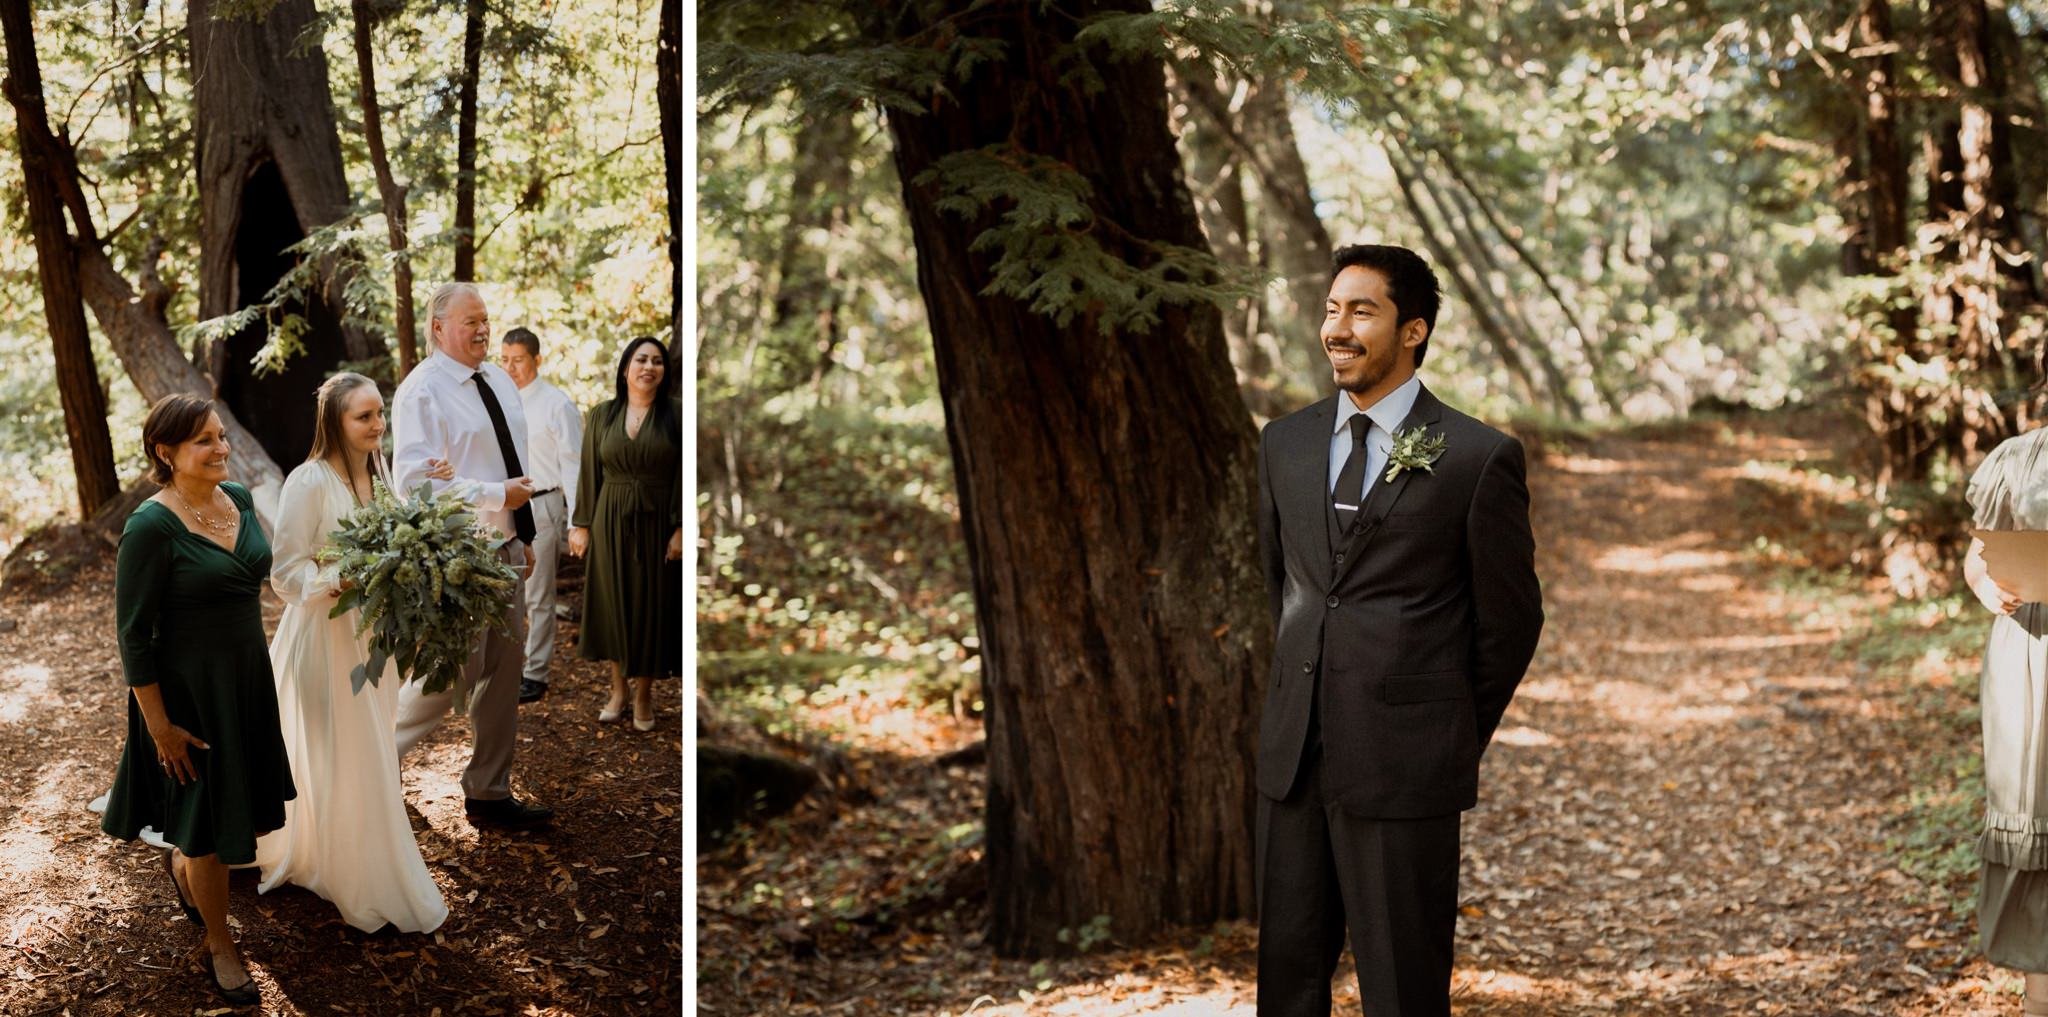 039_Two-Day Big Sur Redwoods Elopement with Family_Will Khoury Elopement Photographer.jpg